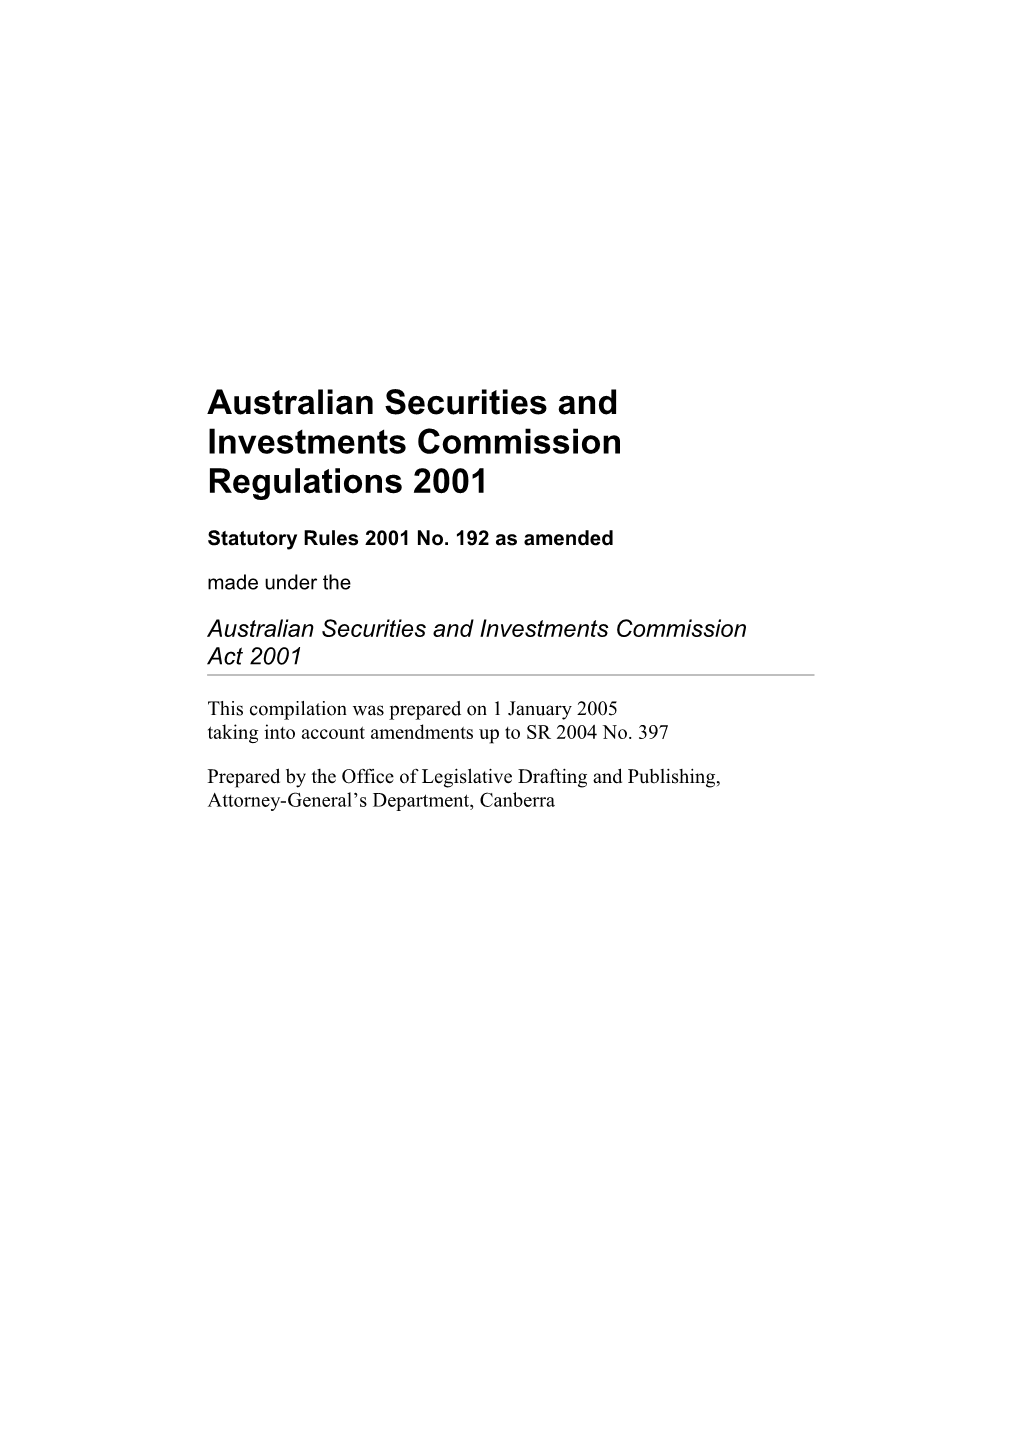 Australian Securities and Investments Commission Regulations 2001